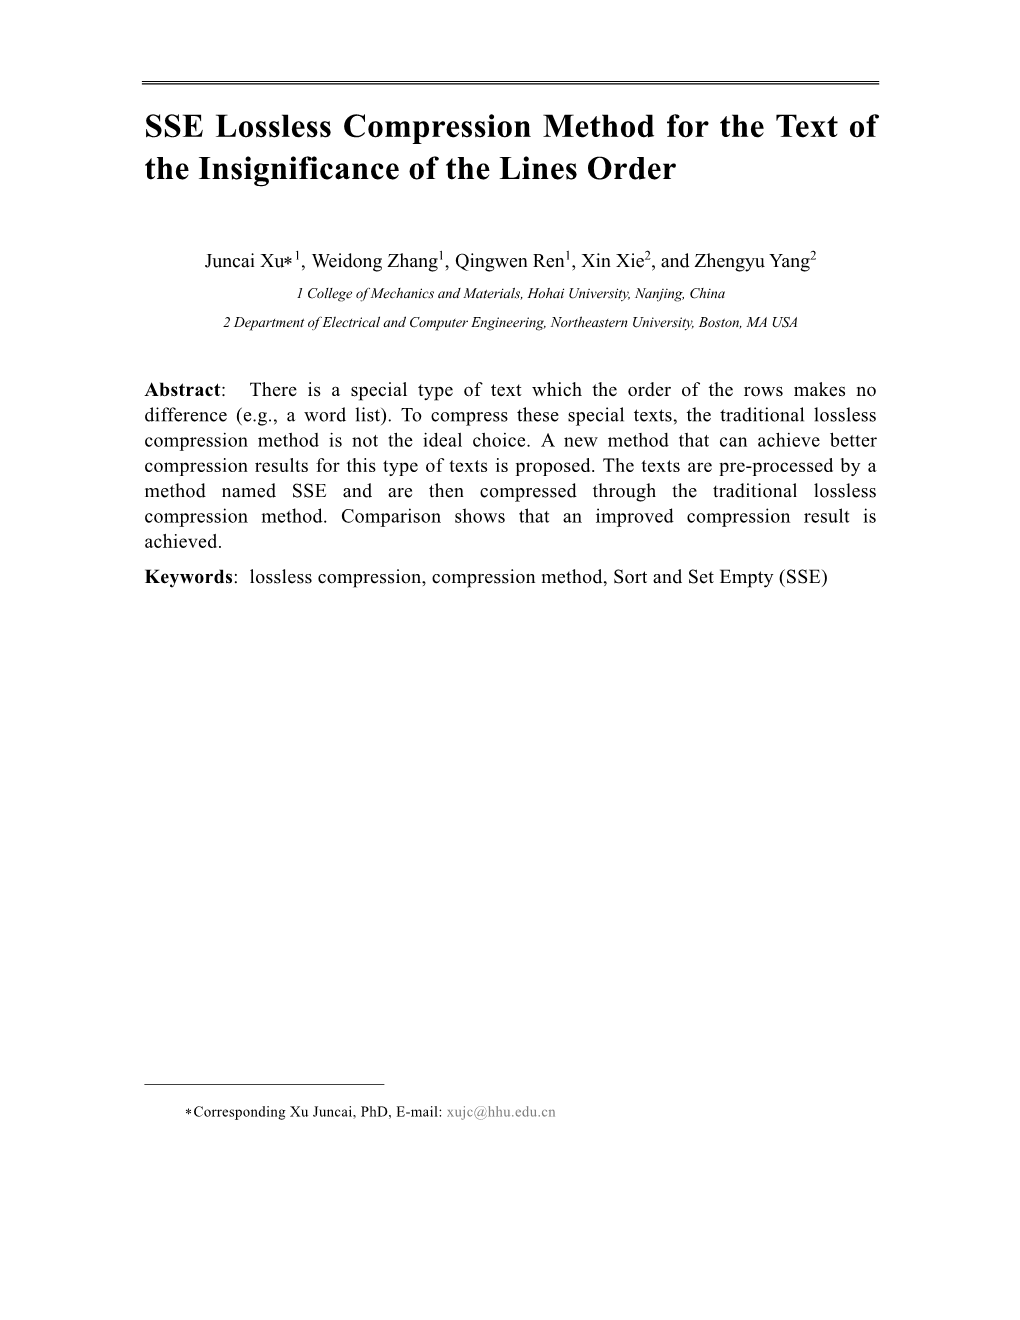 SSE Lossless Compression Method for the Text of the Insignificance of the Lines Order